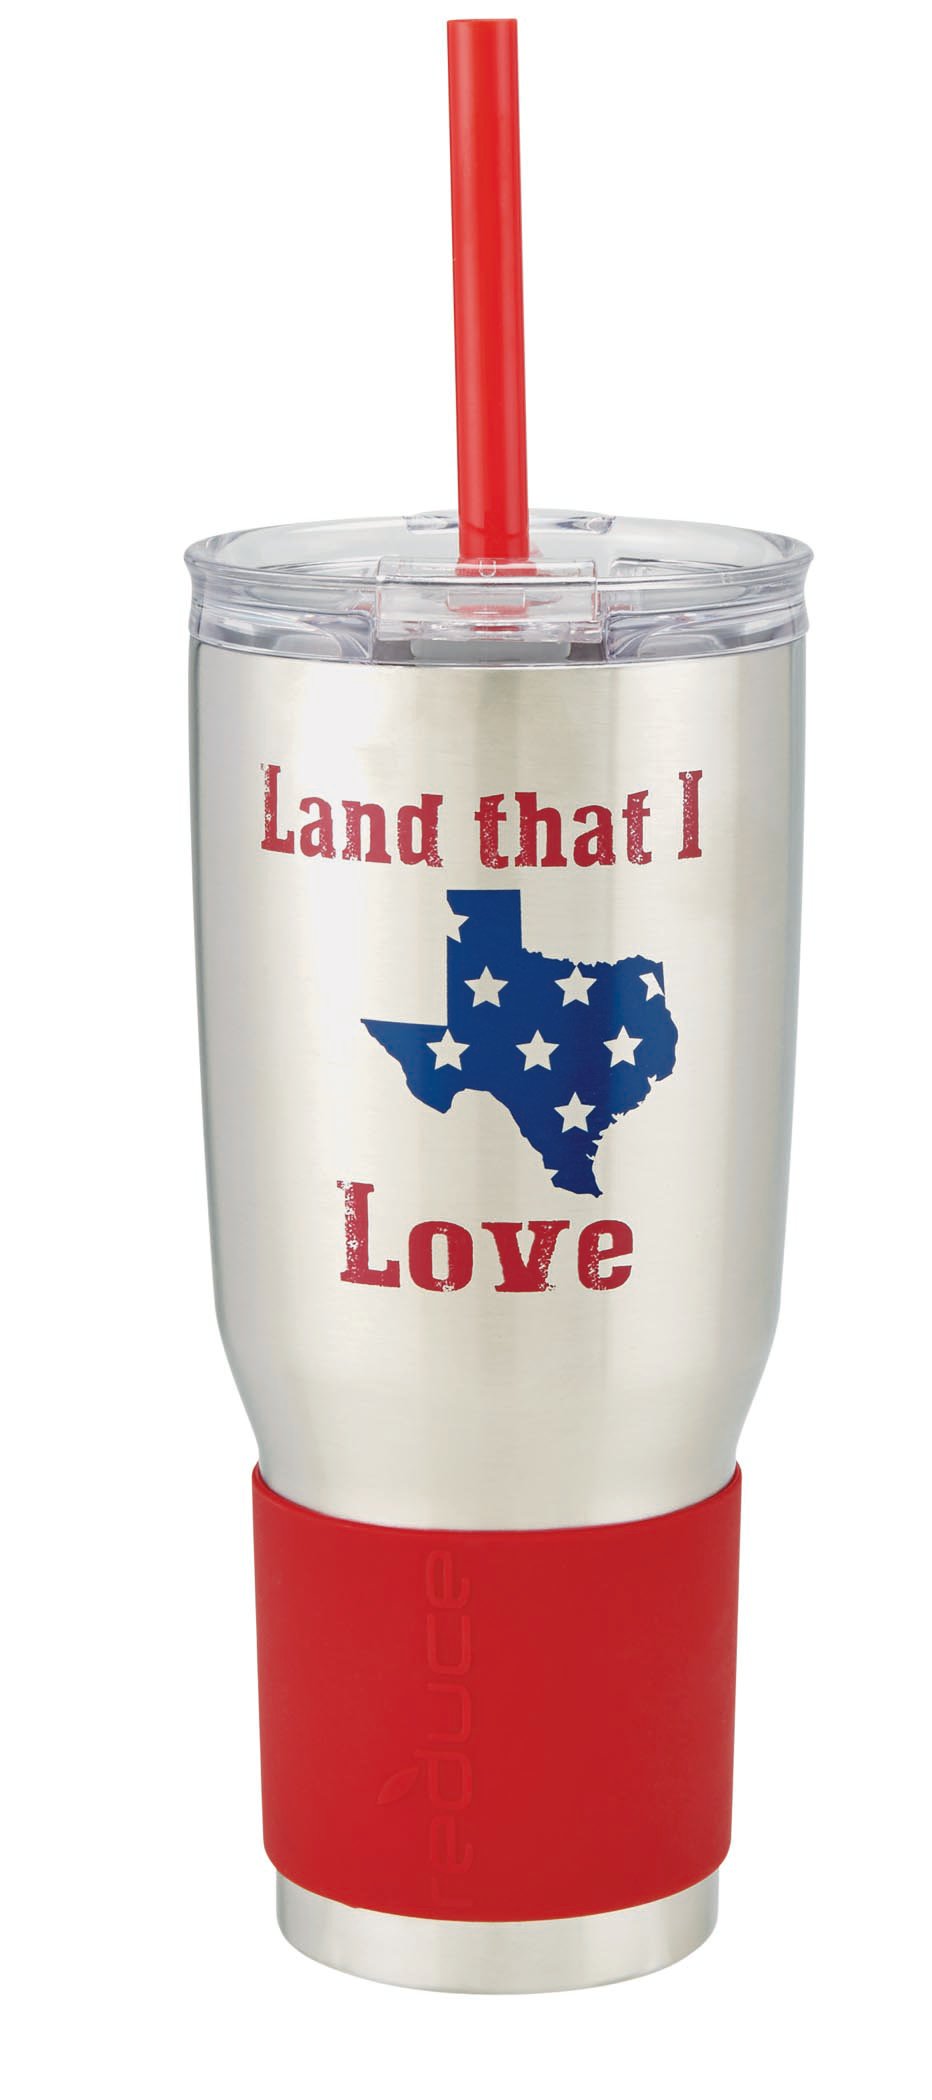 Reduce Cold1 Tumbler with Handle - Sand - Shop Cups & Tumblers at H-E-B